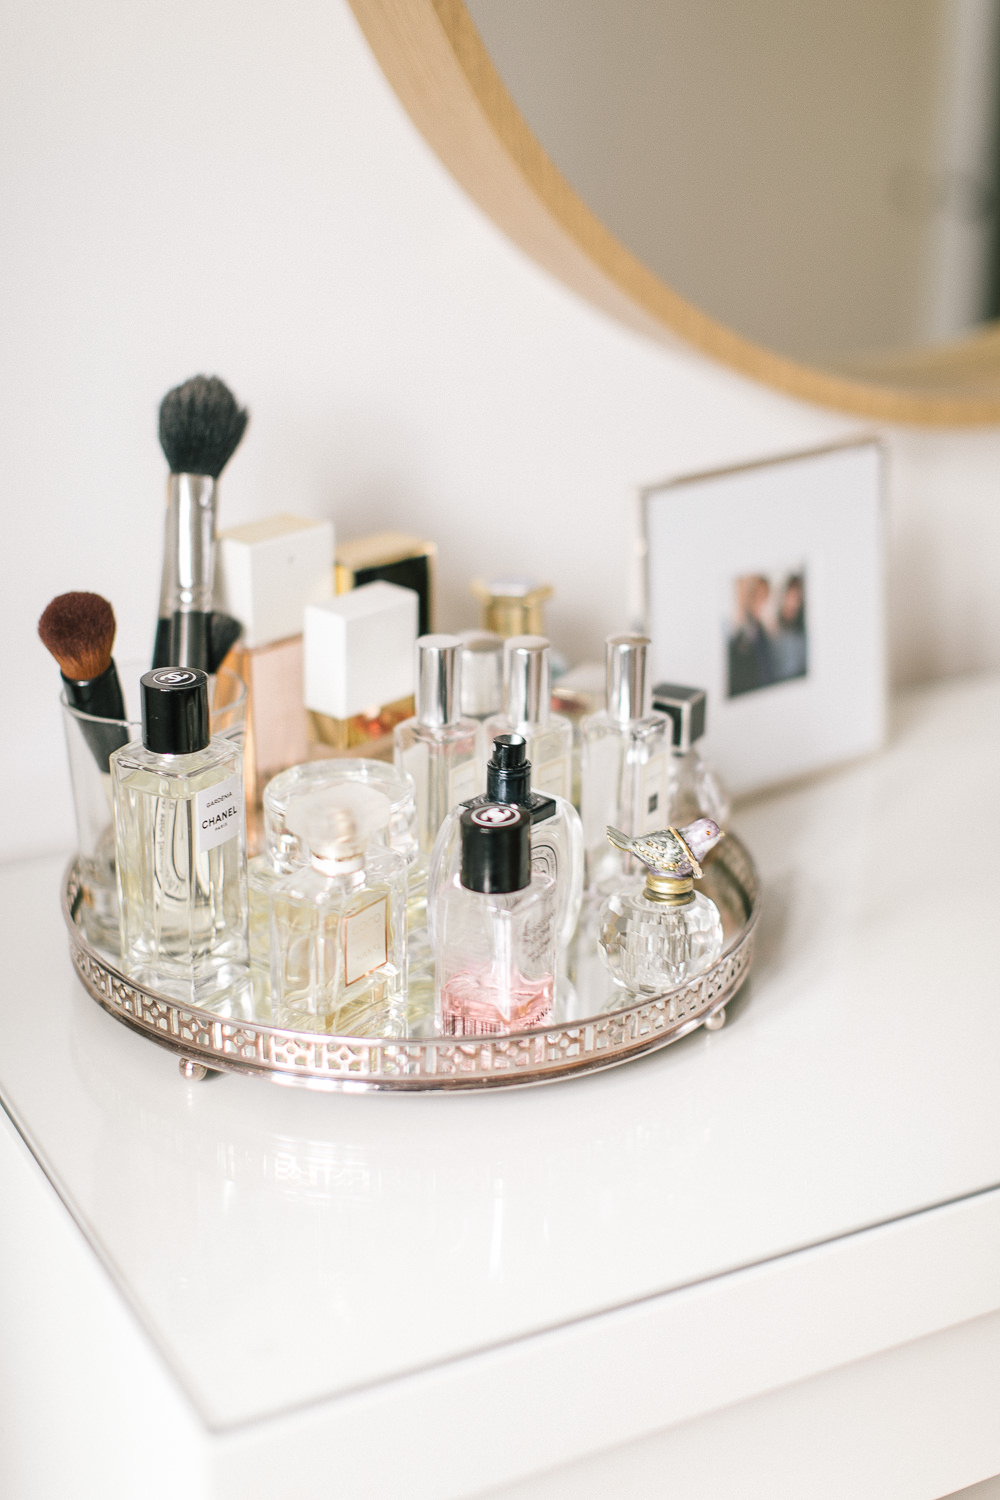 How to Display Perfumes | Circular Silver Mirrored Tray | White Company Photo Frame